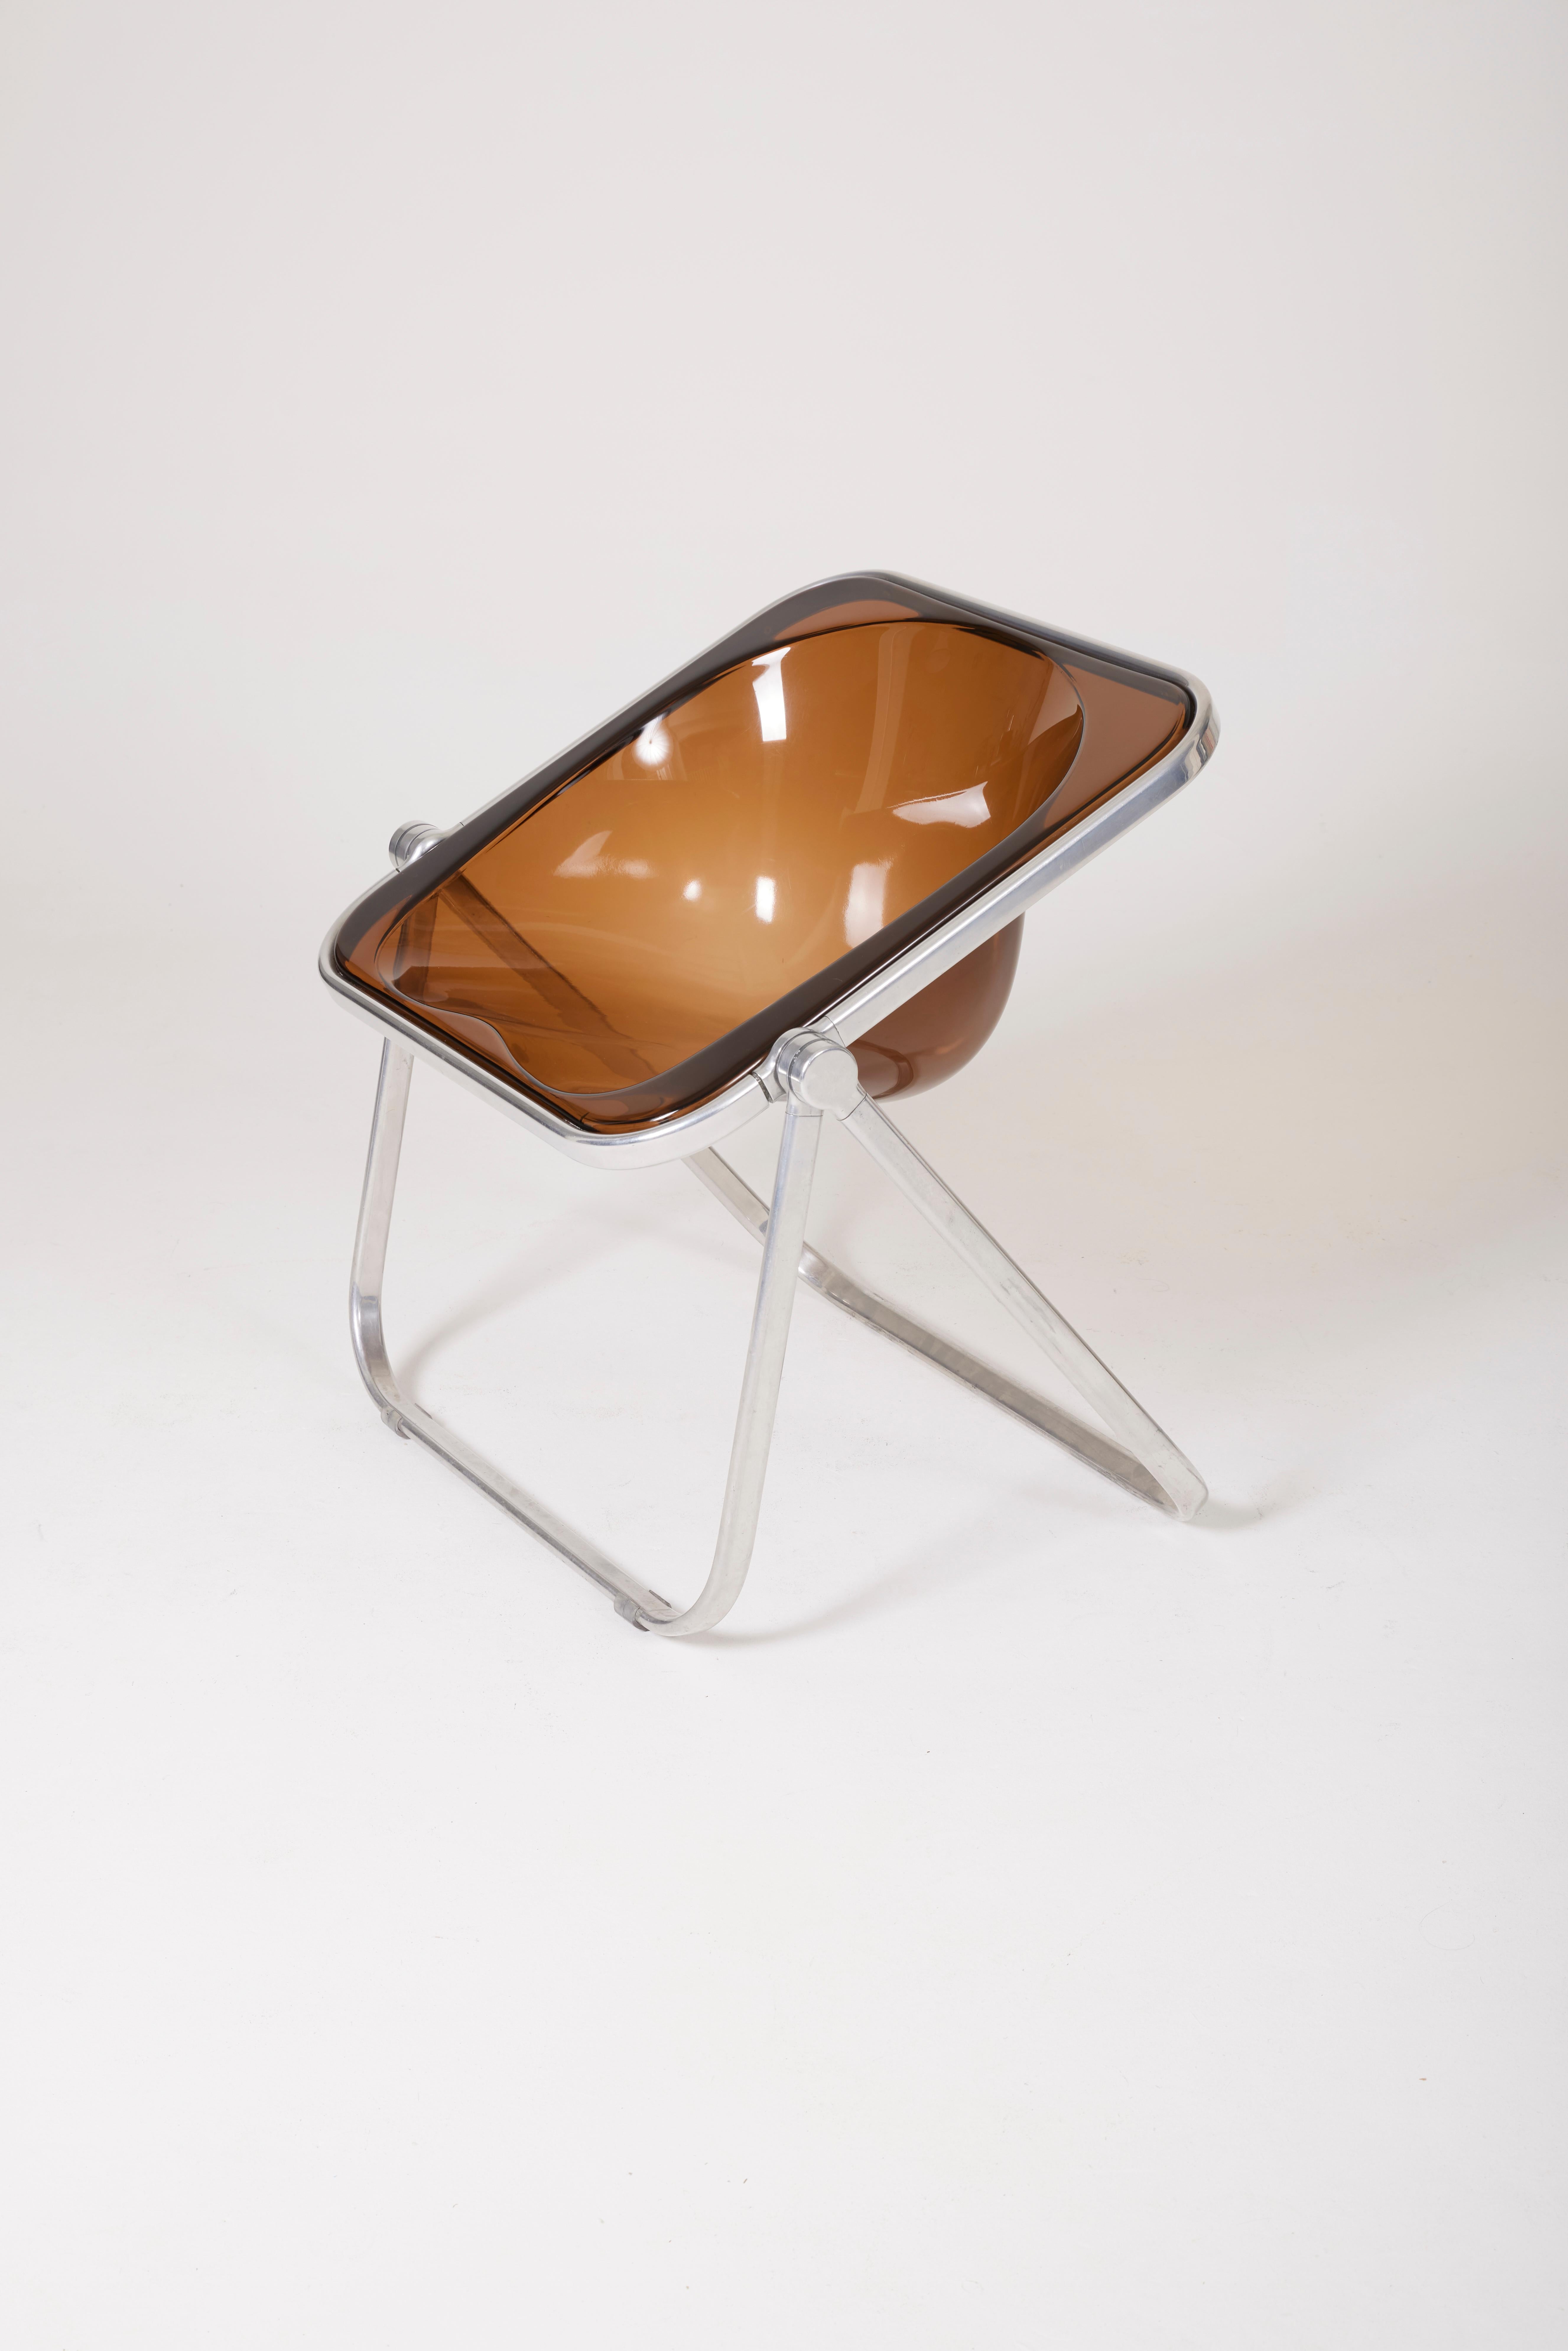 Plona armchair by Giancarlo Piretti for Castelli, dating from the 1970s. Polished aluminum frame and smoked methacrylate shell. Very rare in this condition. 2 chairs available.
LP1837-1838-1839-1940